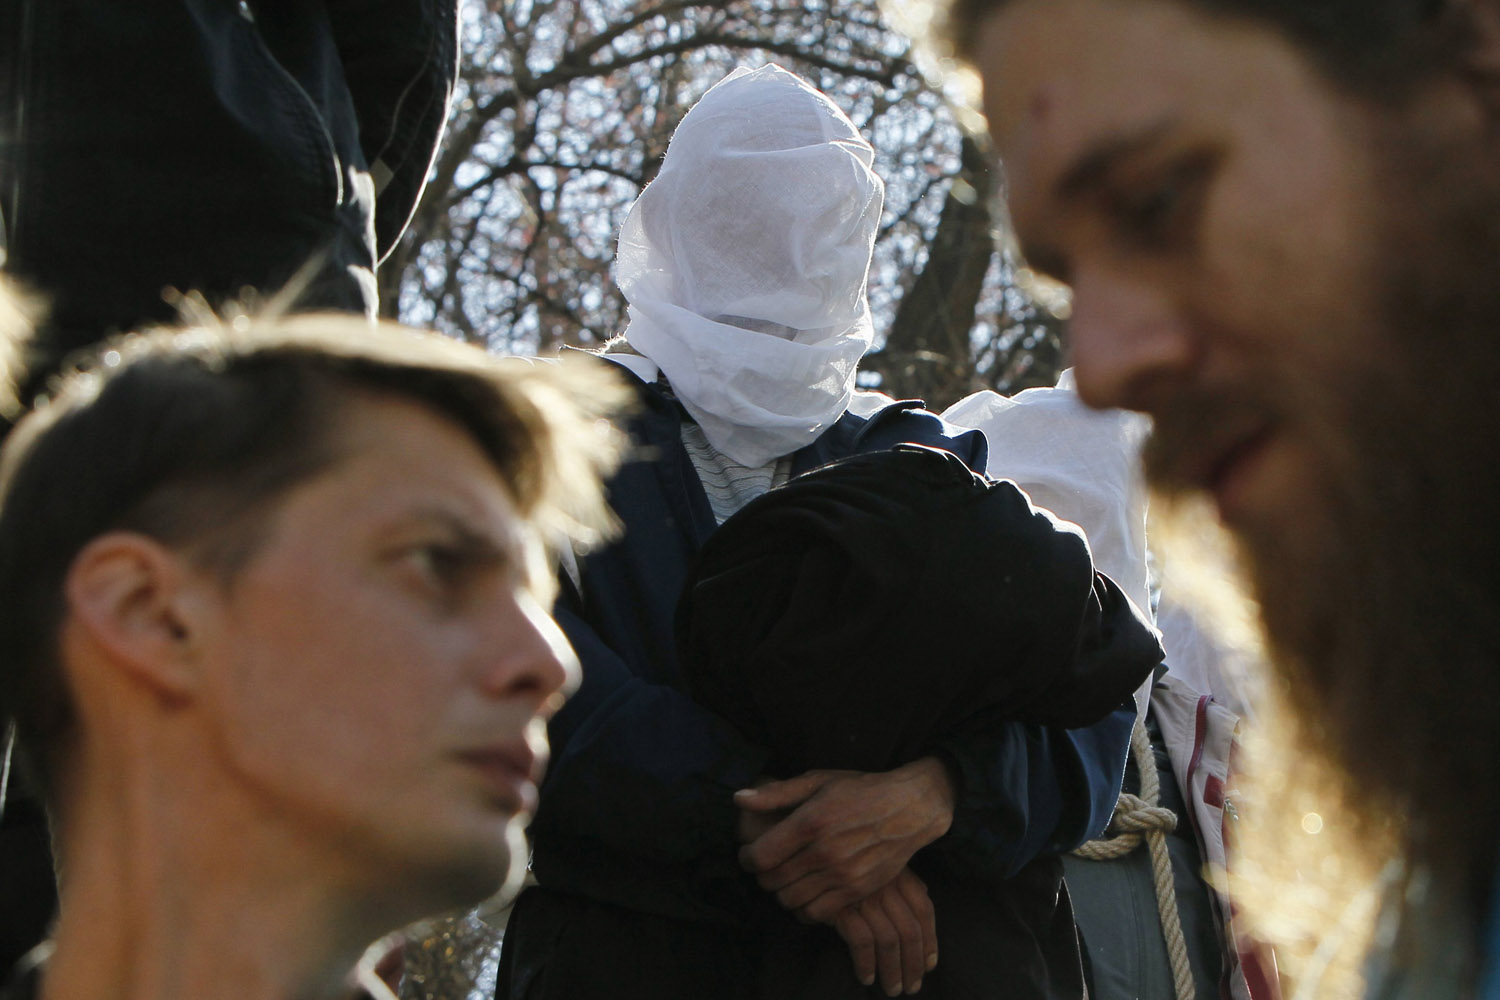 April 17, 2013. A protester takes part in a rally staged by Ukrainians suffering from infectious diseases such as HIV, AIDS, tuberculosis and hepatitis in front of Ukrainian Cabinet of Ministers building to protest the lack of drugs for treatment in Kiev.